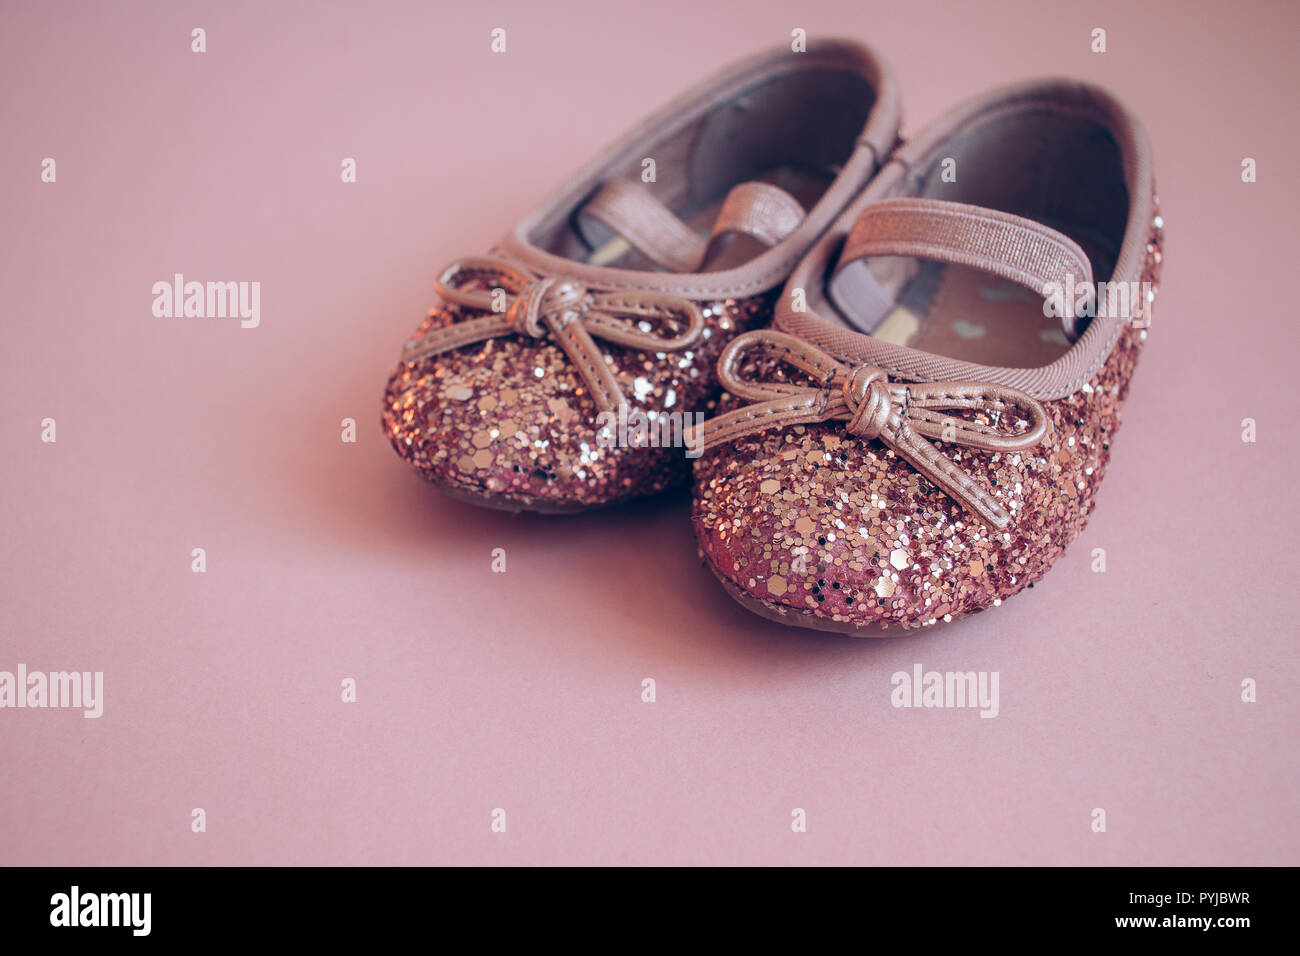 Pin on **GLITTER SHOES - Everything that shines**